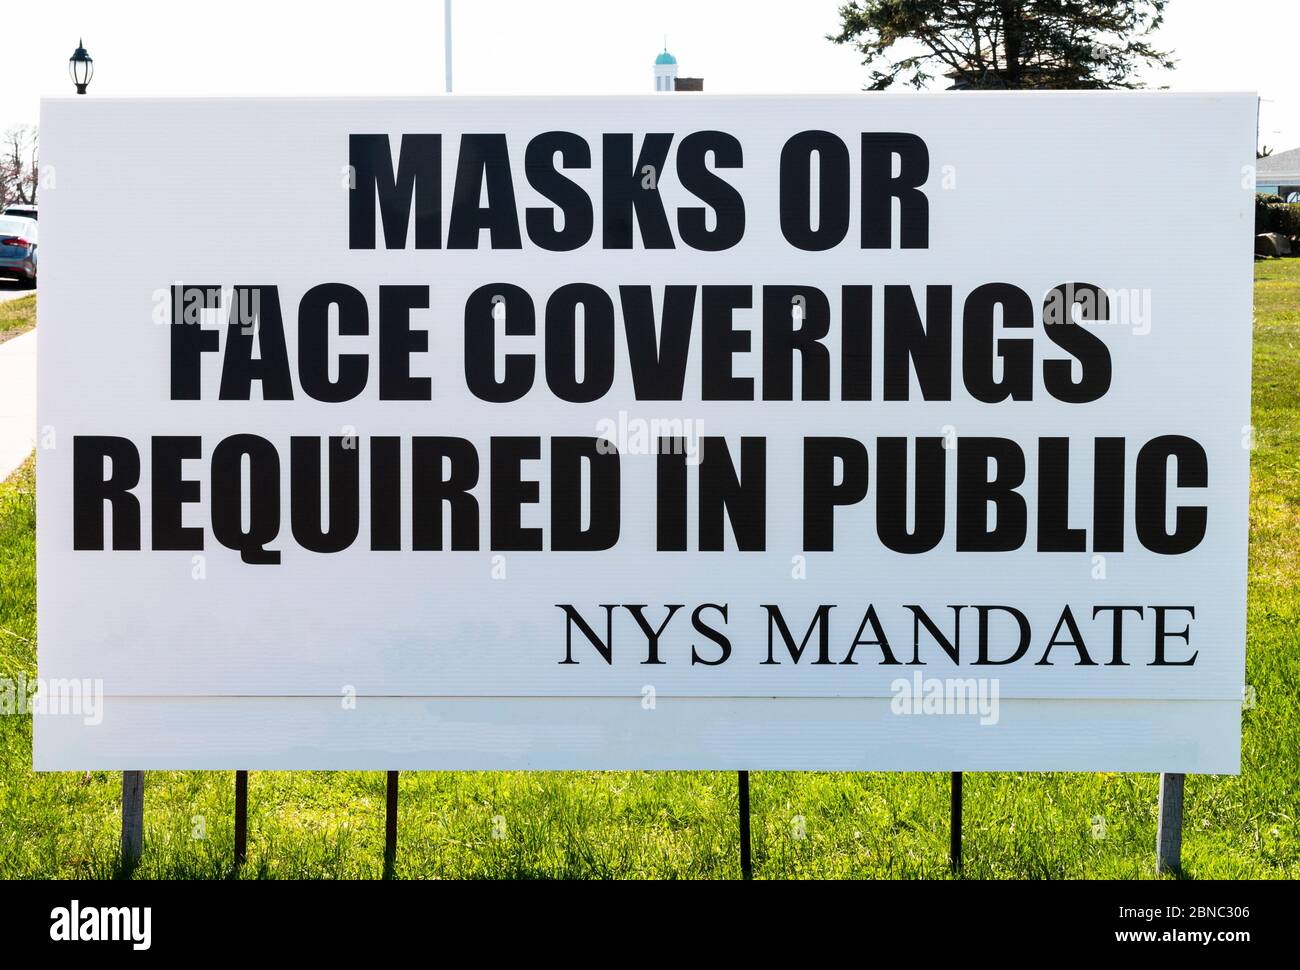 A sign on the side of the road reads Mask or Face Covering Required in Public as you enter a village in Long Island, New York. Stock Photo